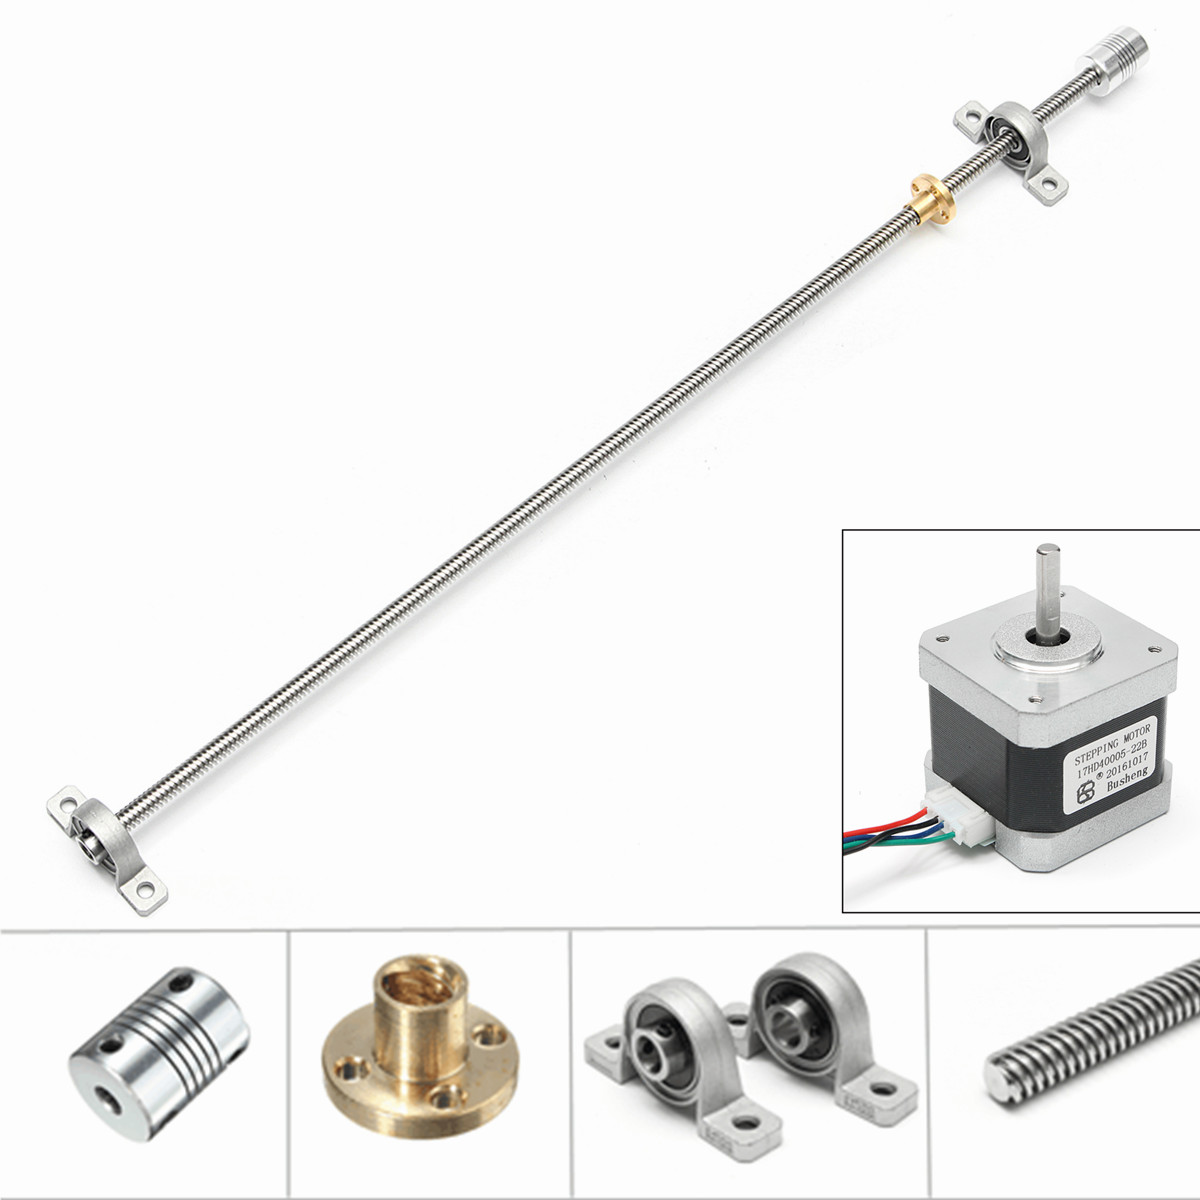 T8 600mm Stainless Steel Lead Screw Coupling Shaft Mounting + Motor For 3D Printer 12